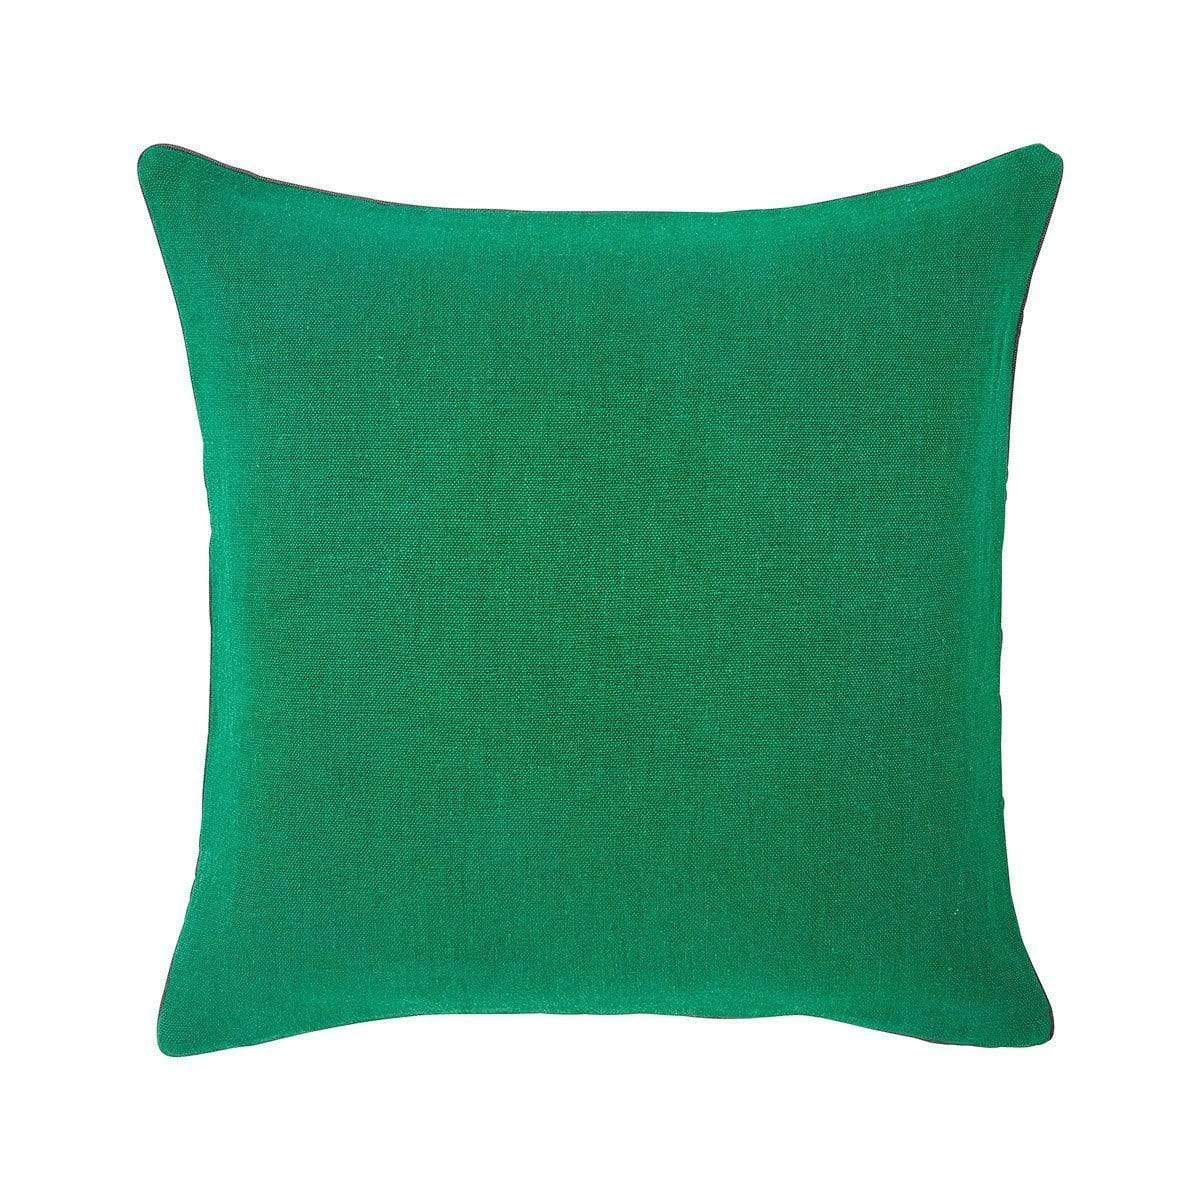 Iosis Pigment Decorative Pillow by Yves Delorme Everett Stunz